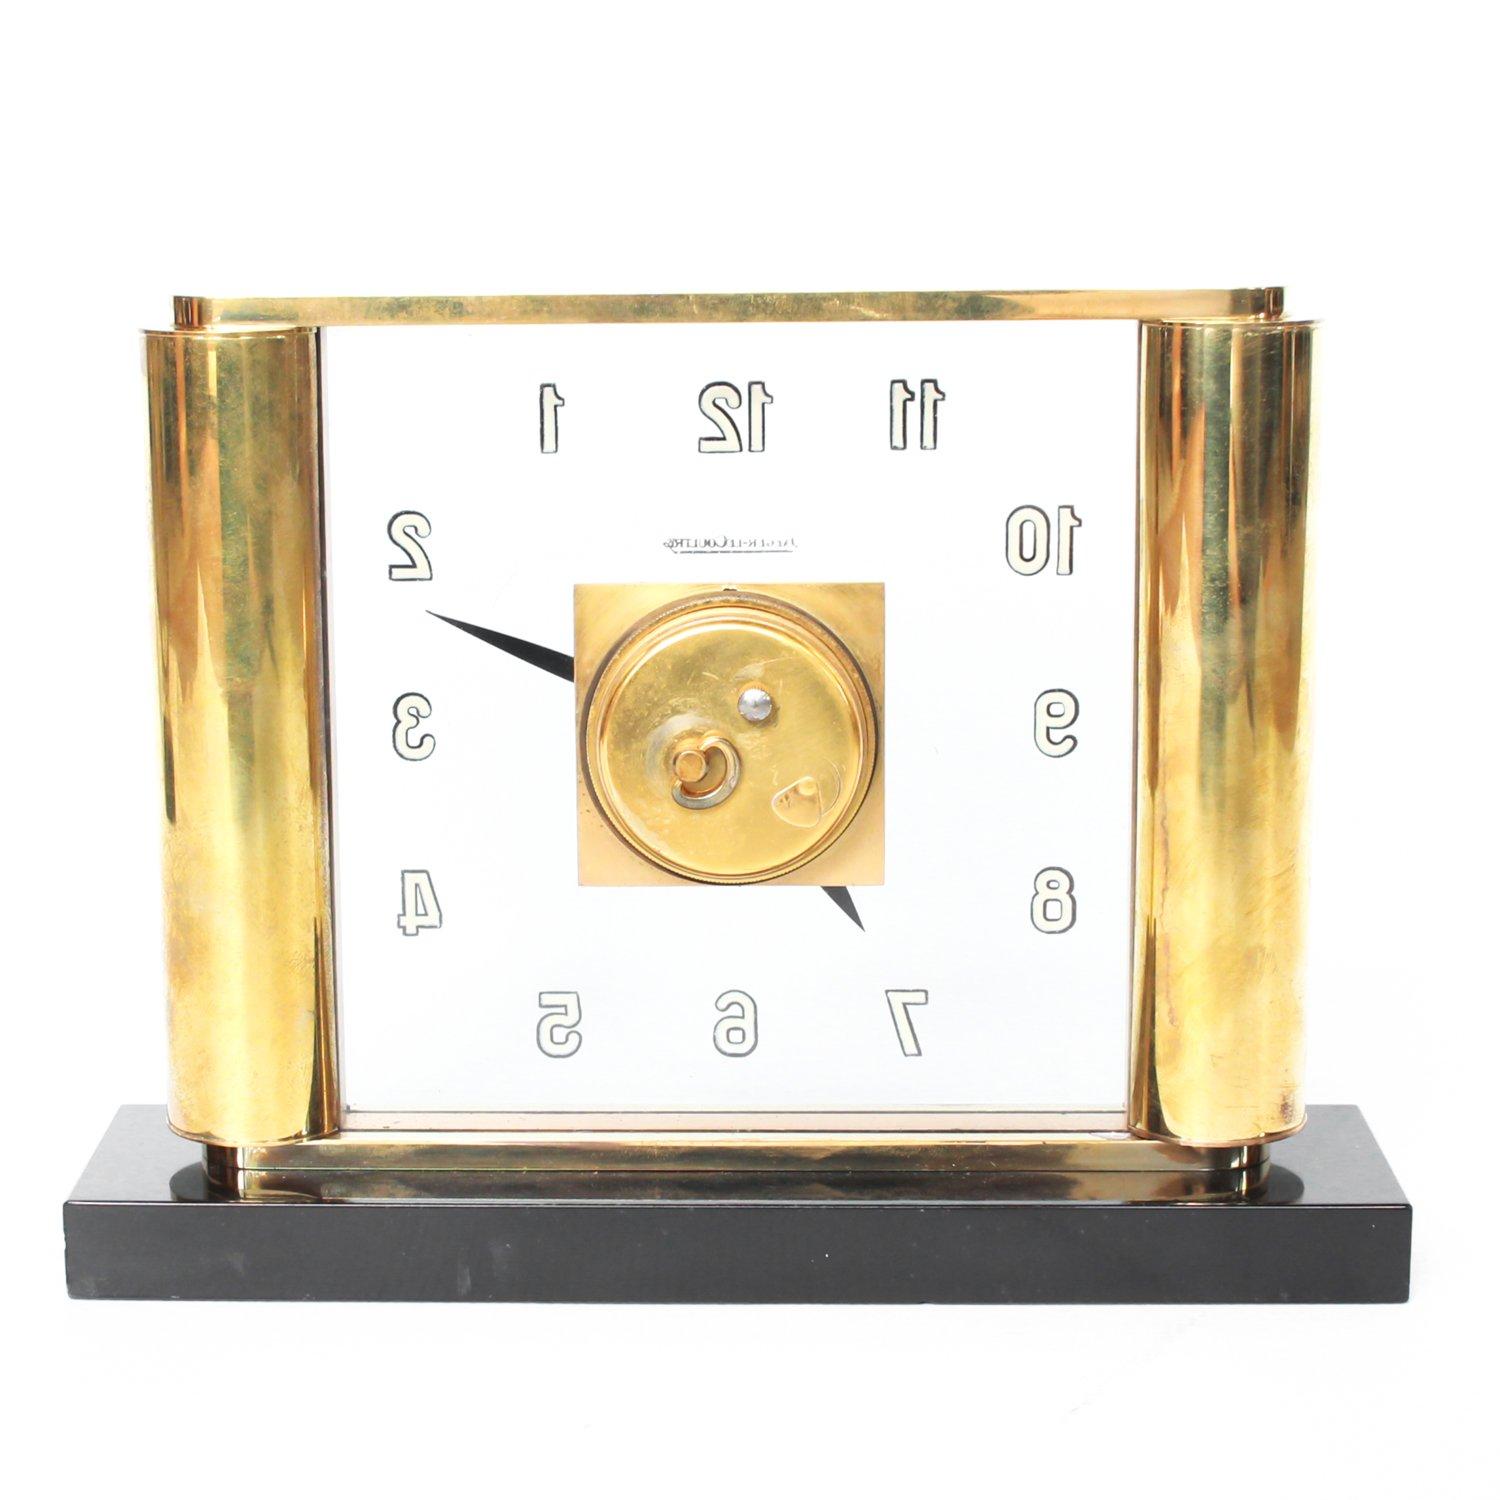 A Jaeger-LeCoultre, Art Deco, brass, and glass clock. Original mechanism with eight day movement. In good working order.

In 1903, Paris based watchmaker Edmond Jaeger set a Challenge for Swiss manufacturers to develop and produce ultra-thin